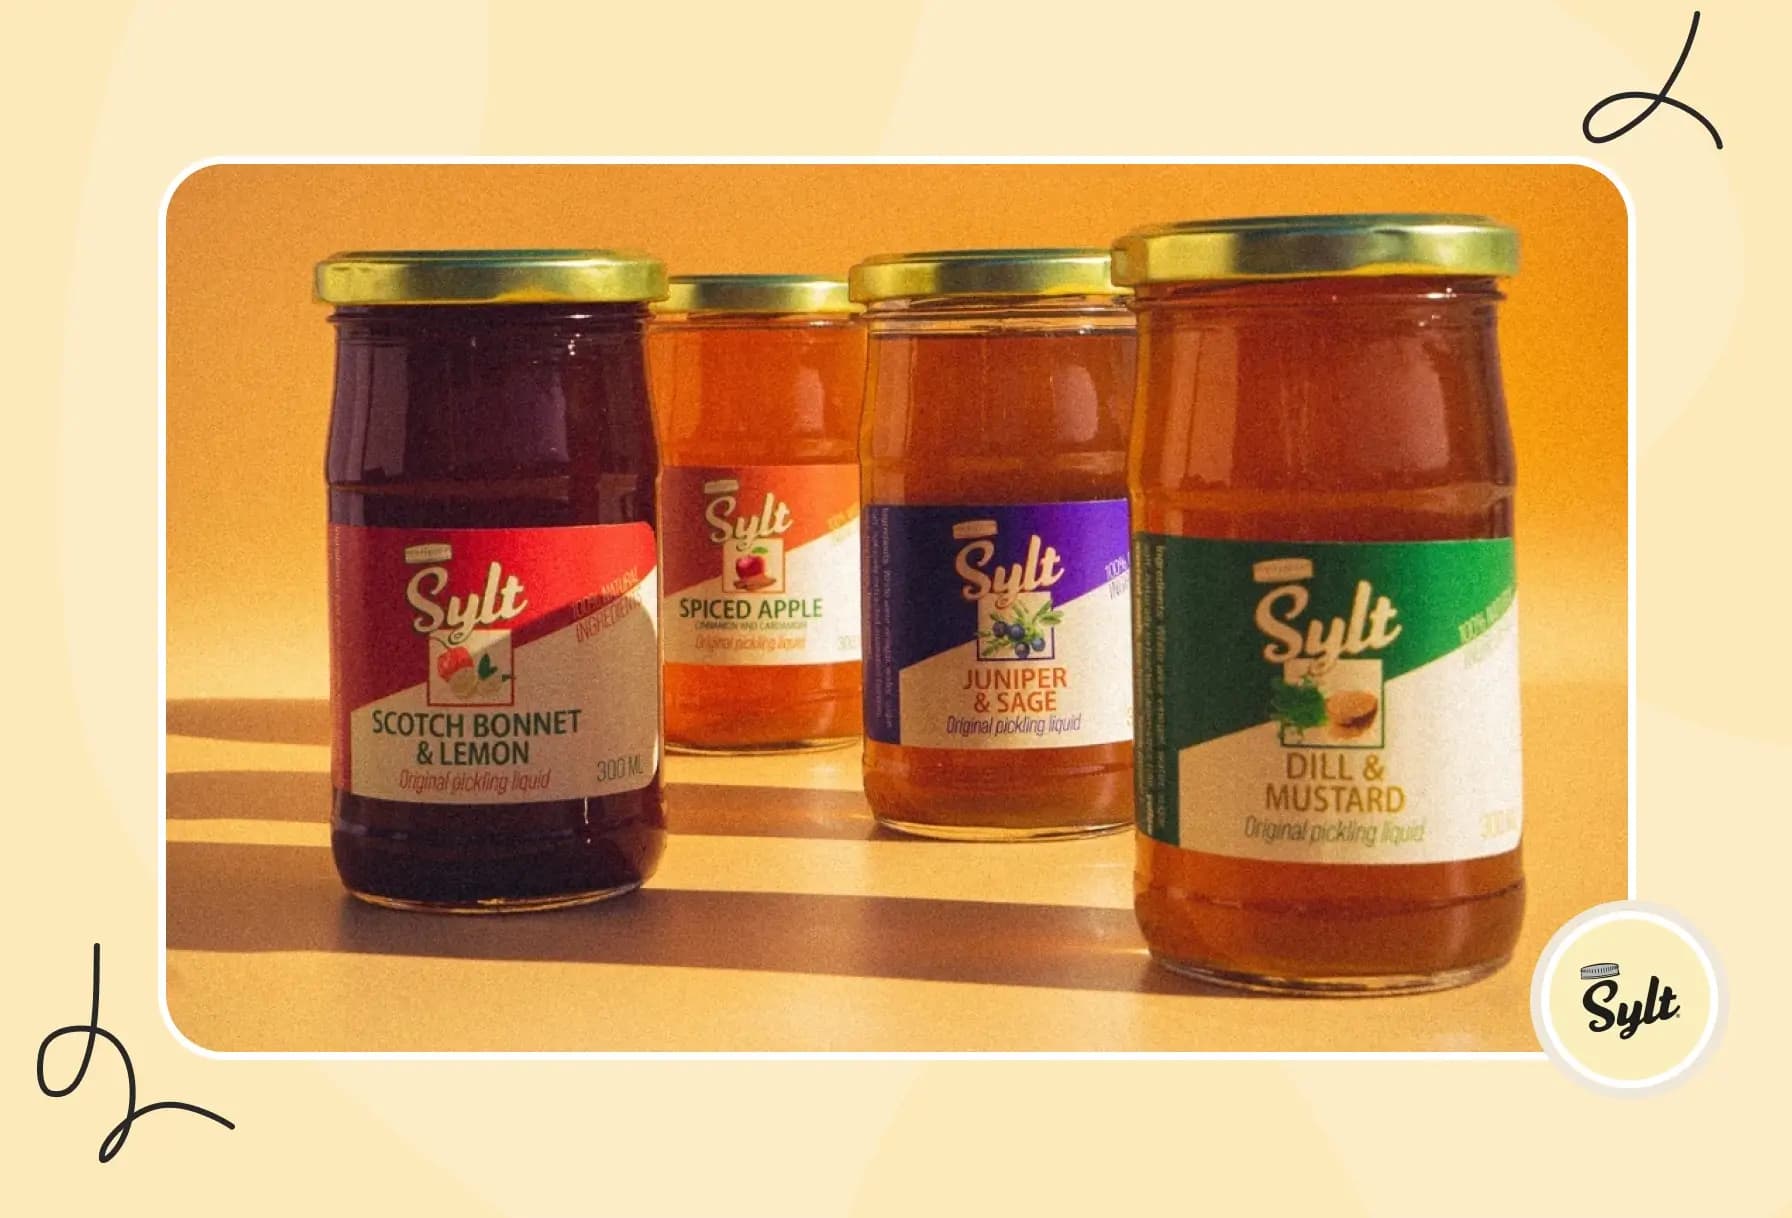 Sylt Pickling: Elevating Home Pickling with Award-Winning Flavours